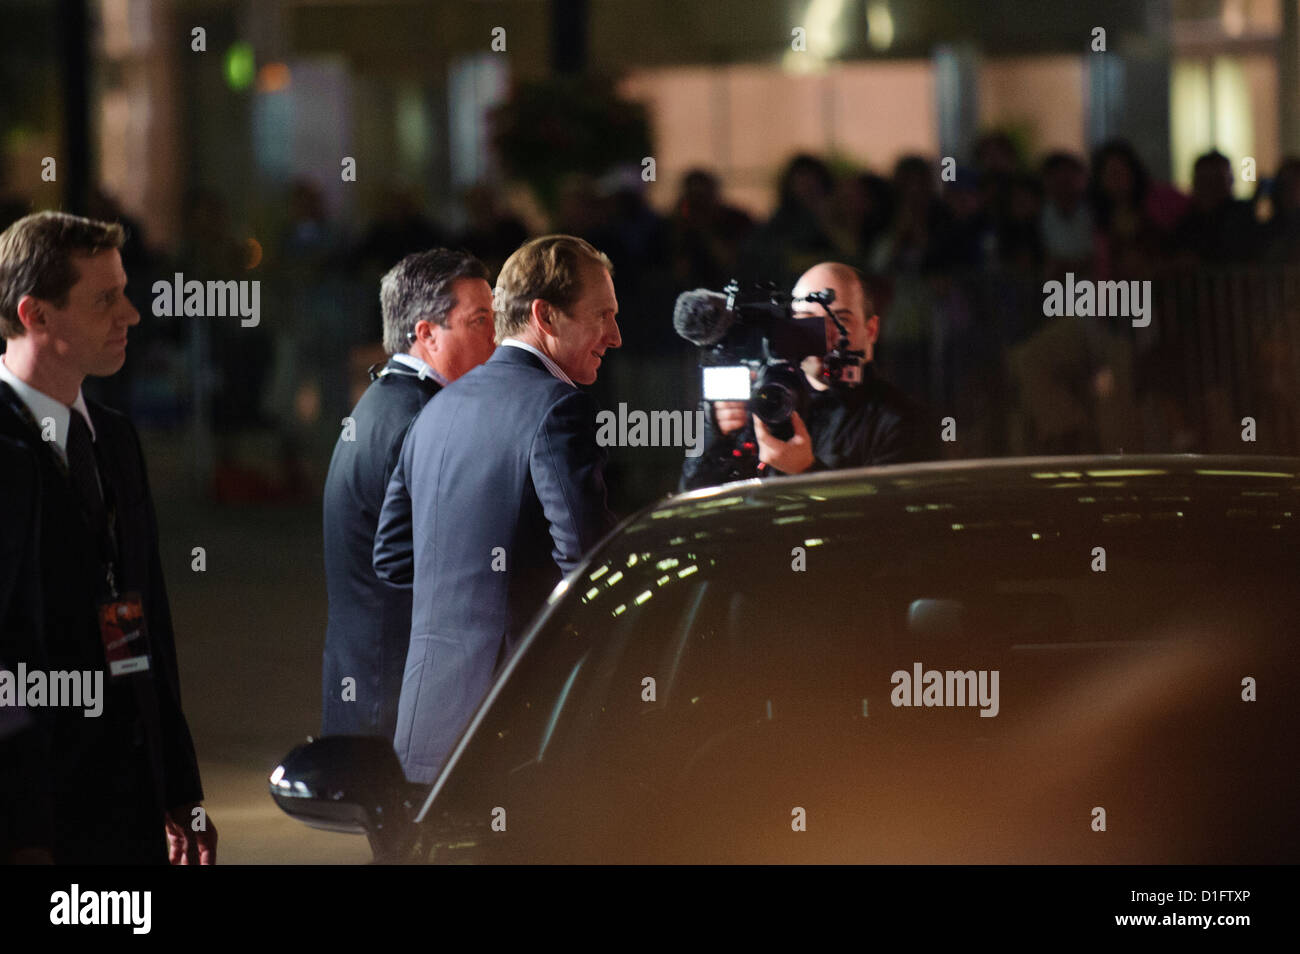 Actor Ralph Fiennes arrive for the screening of 'Great Expectations' at the Toronto International Film Festival Stock Photo